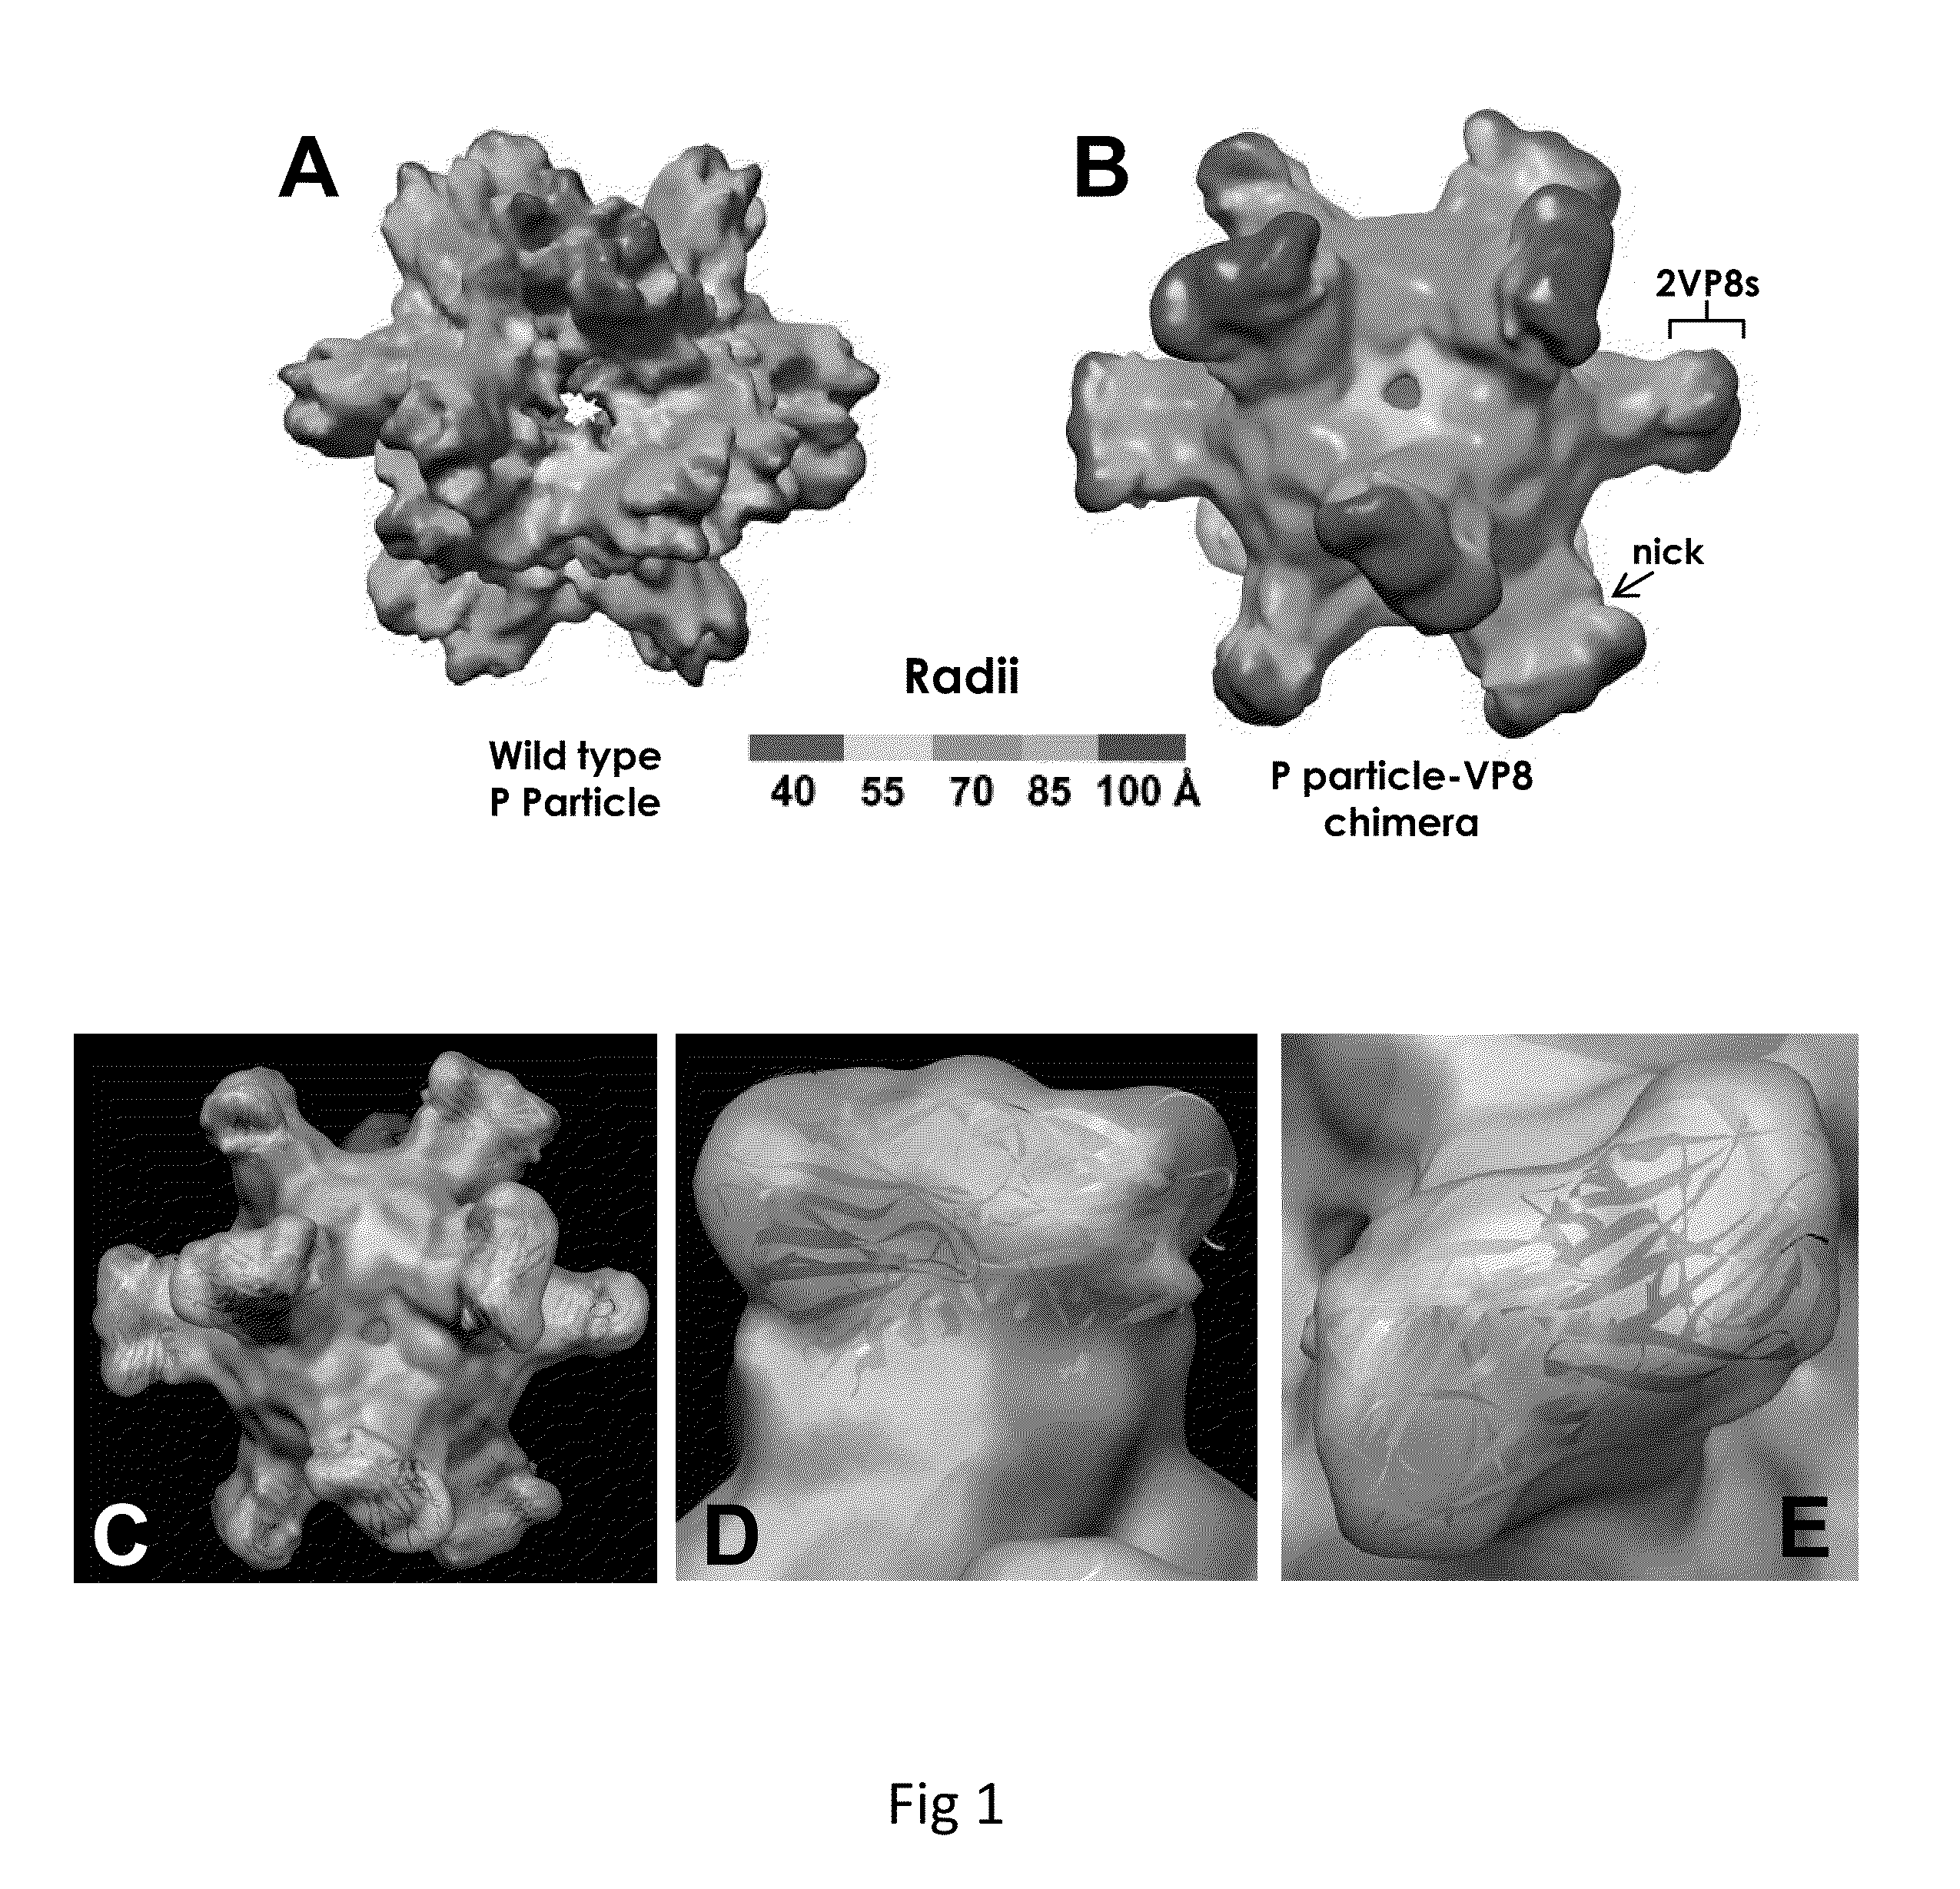 Antigen-norovirus P-domain monomers and dimers, antigen-norovirus P-particle molecules, and methods for their making and use